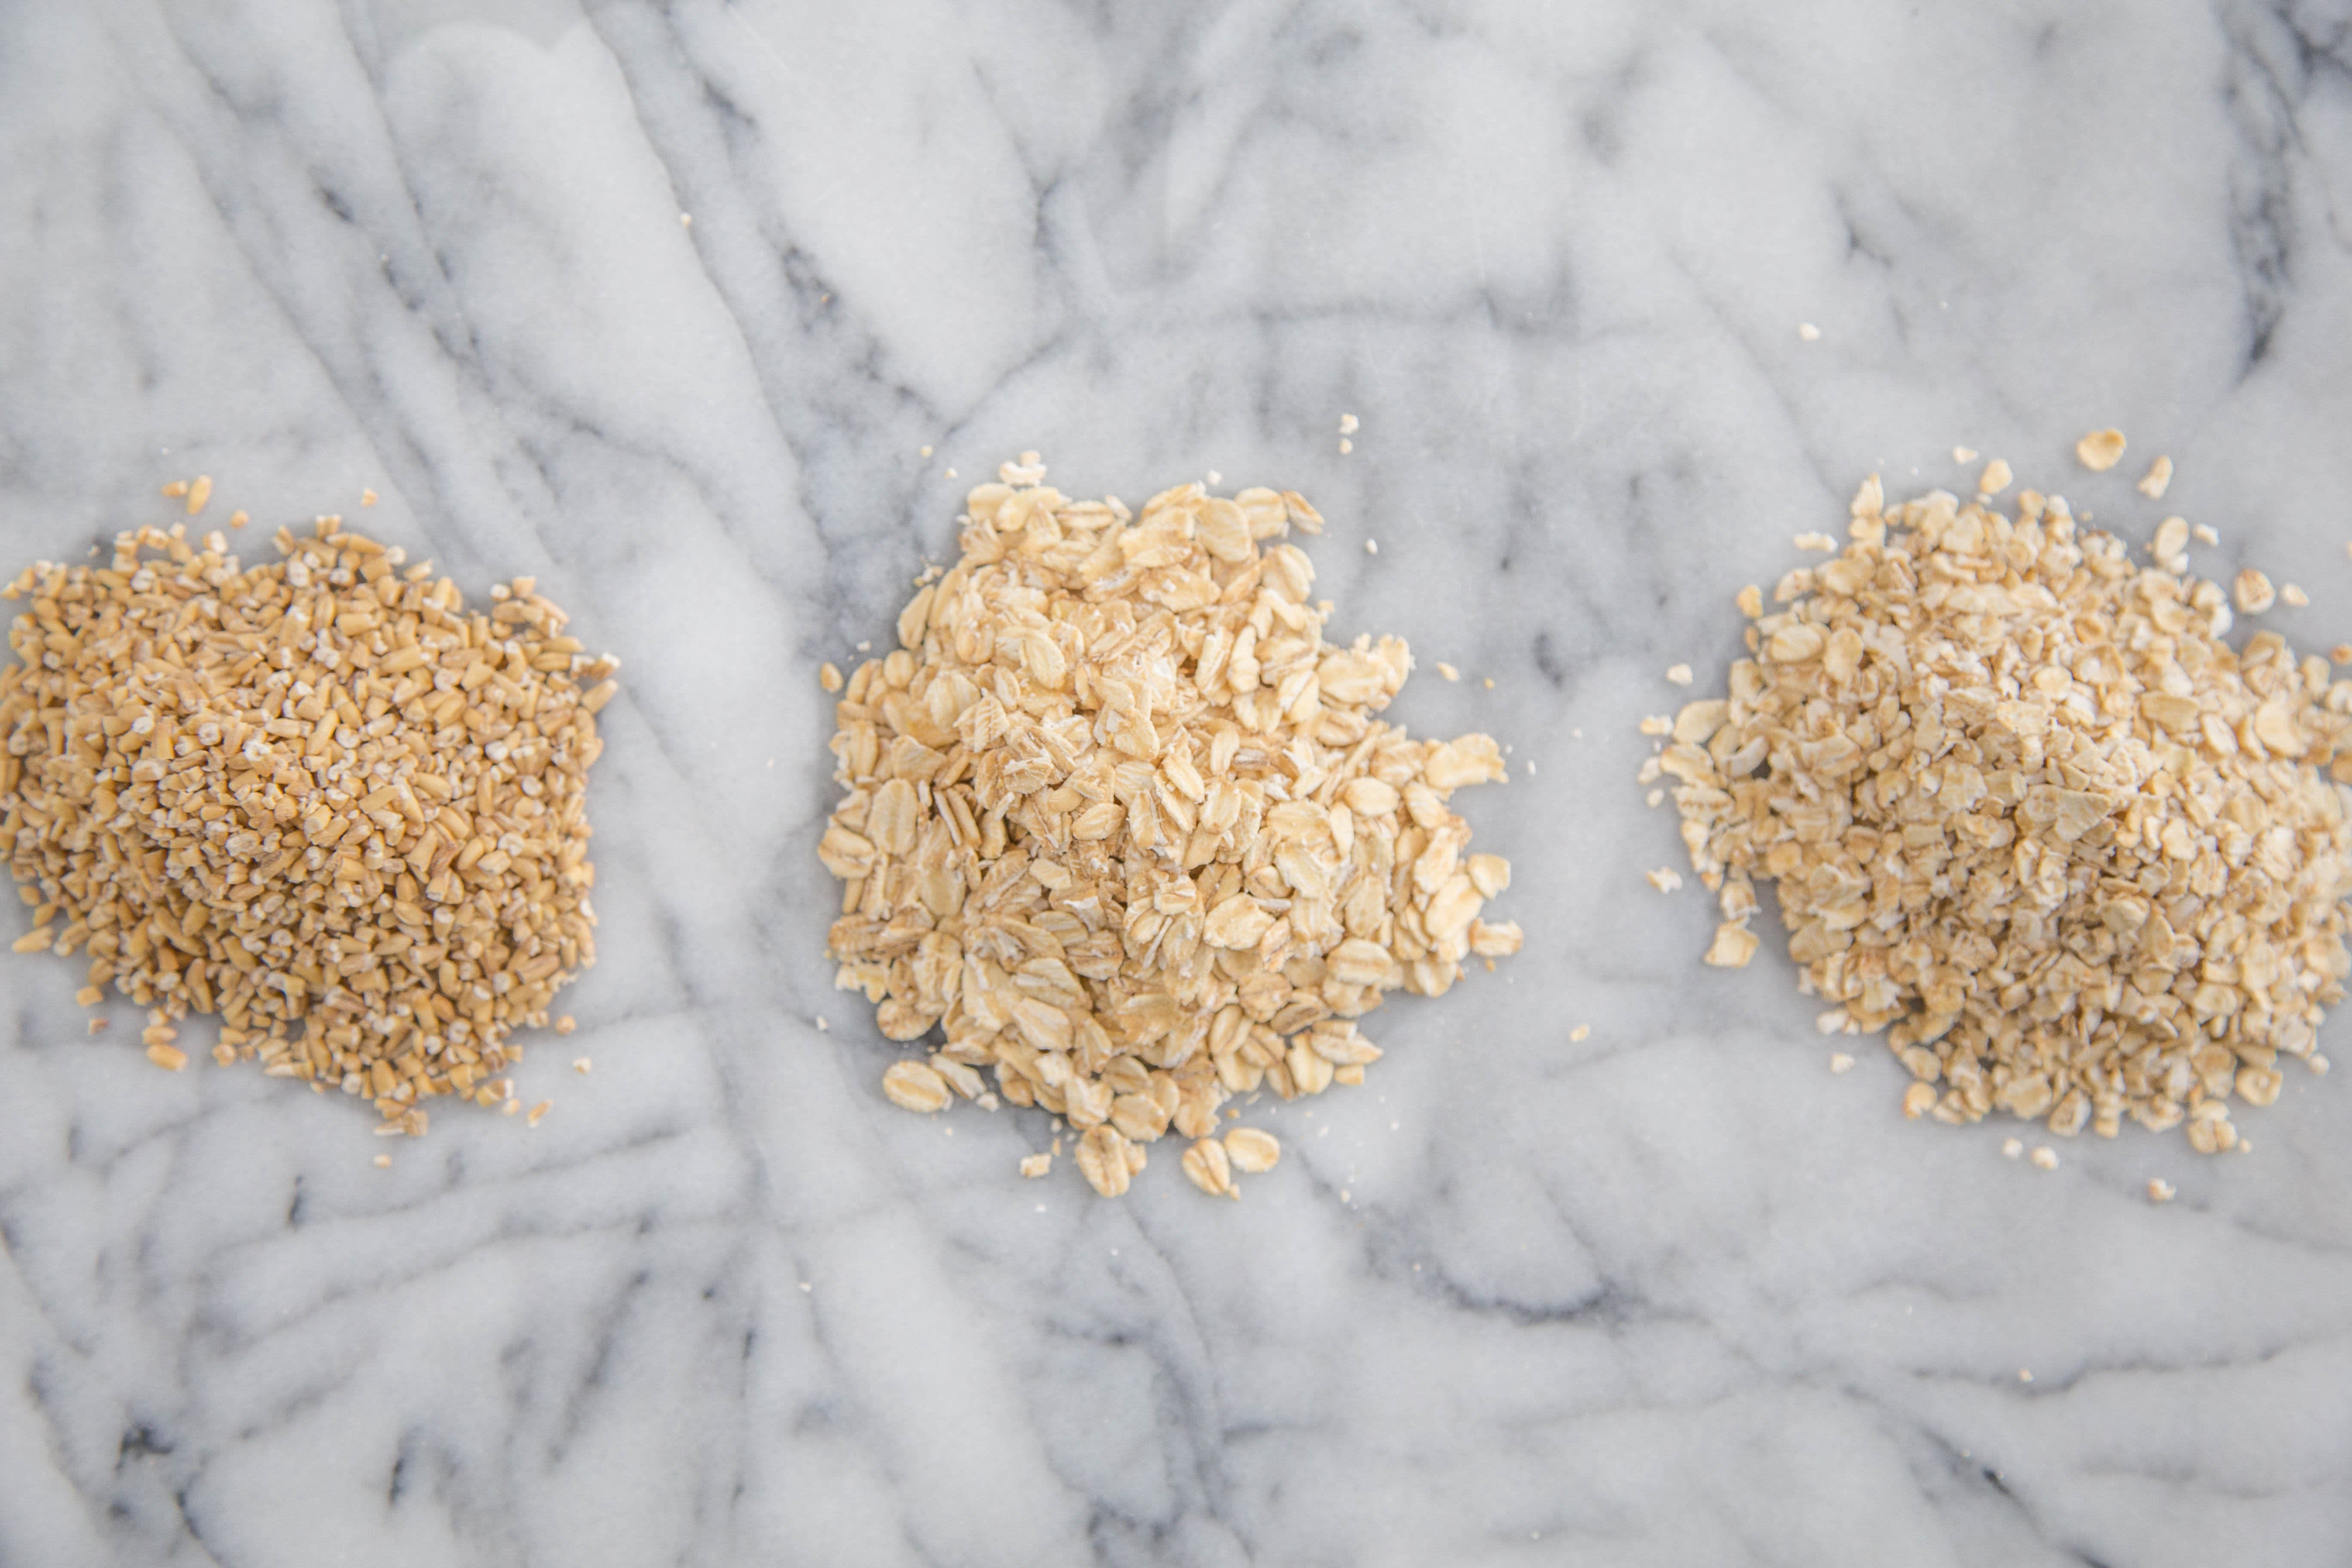 Rolled vs Steel-Cut vs Quick Oats: What's the Difference? – Amazin' Graze  Singapore